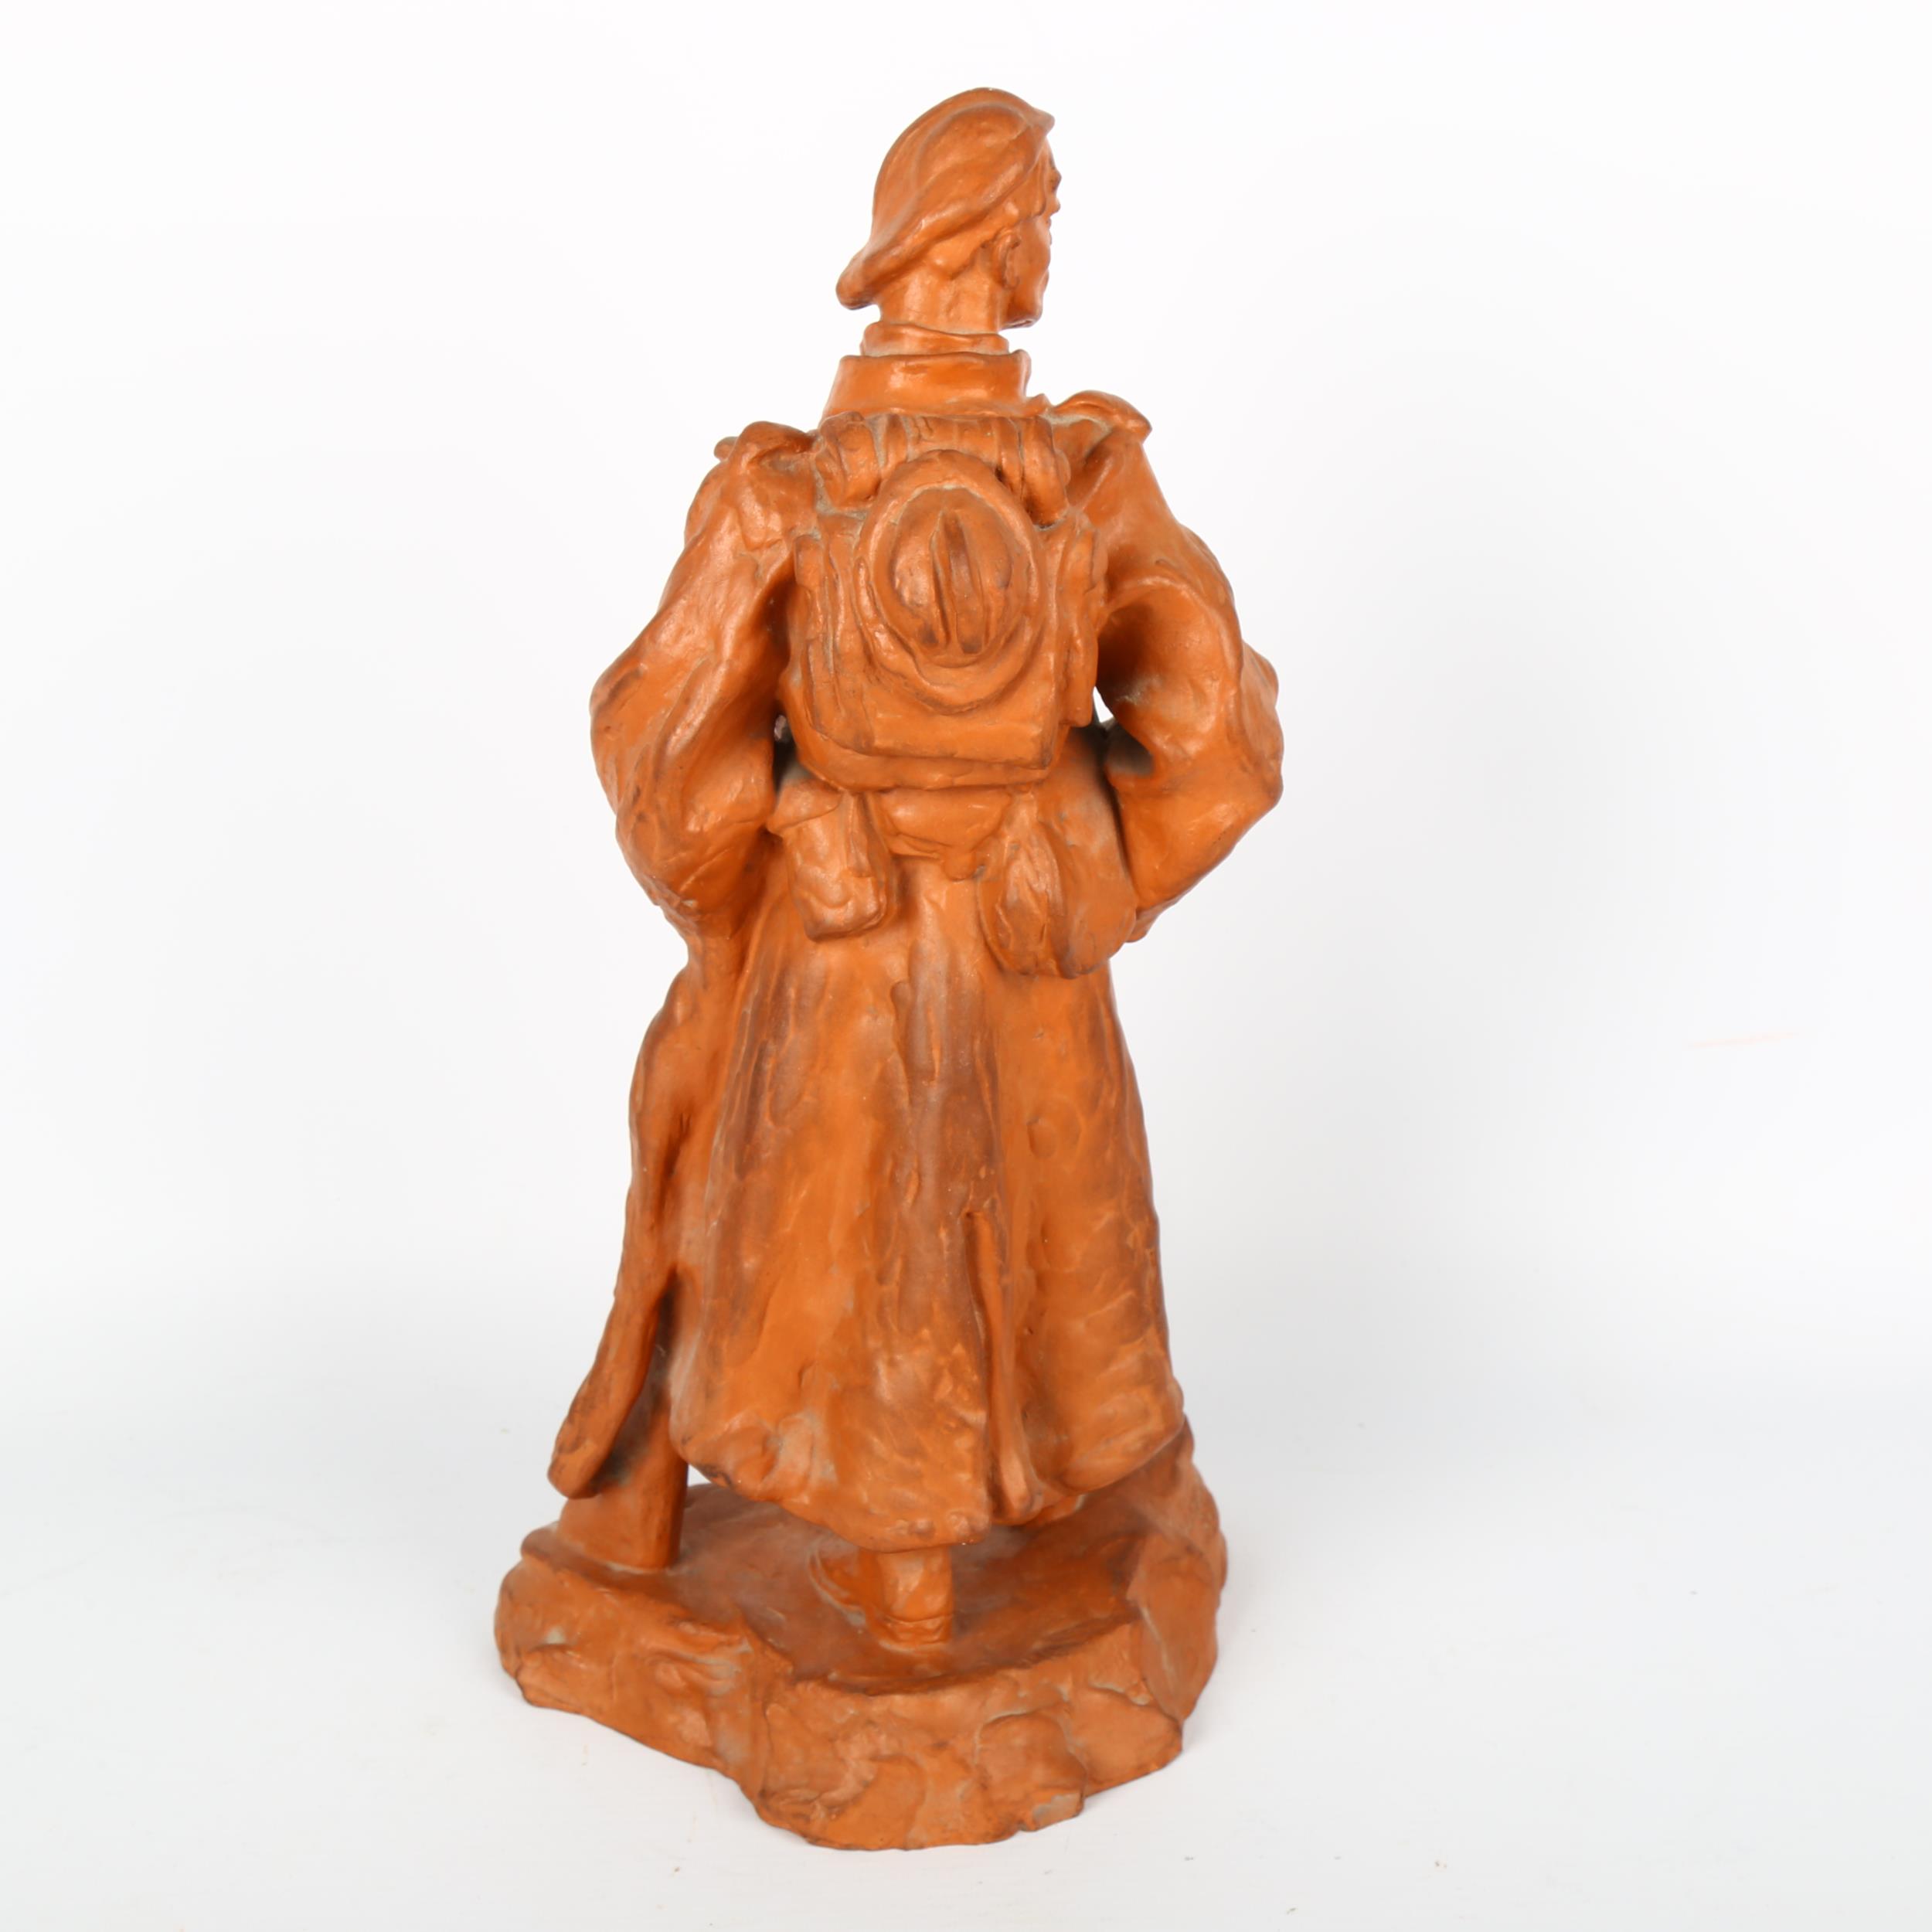 RUDOLF HLAVICA, (1897-1971), a terracotta pottery sculpture of a soldier by Pexider, Czechoslovakia, - Image 2 of 3